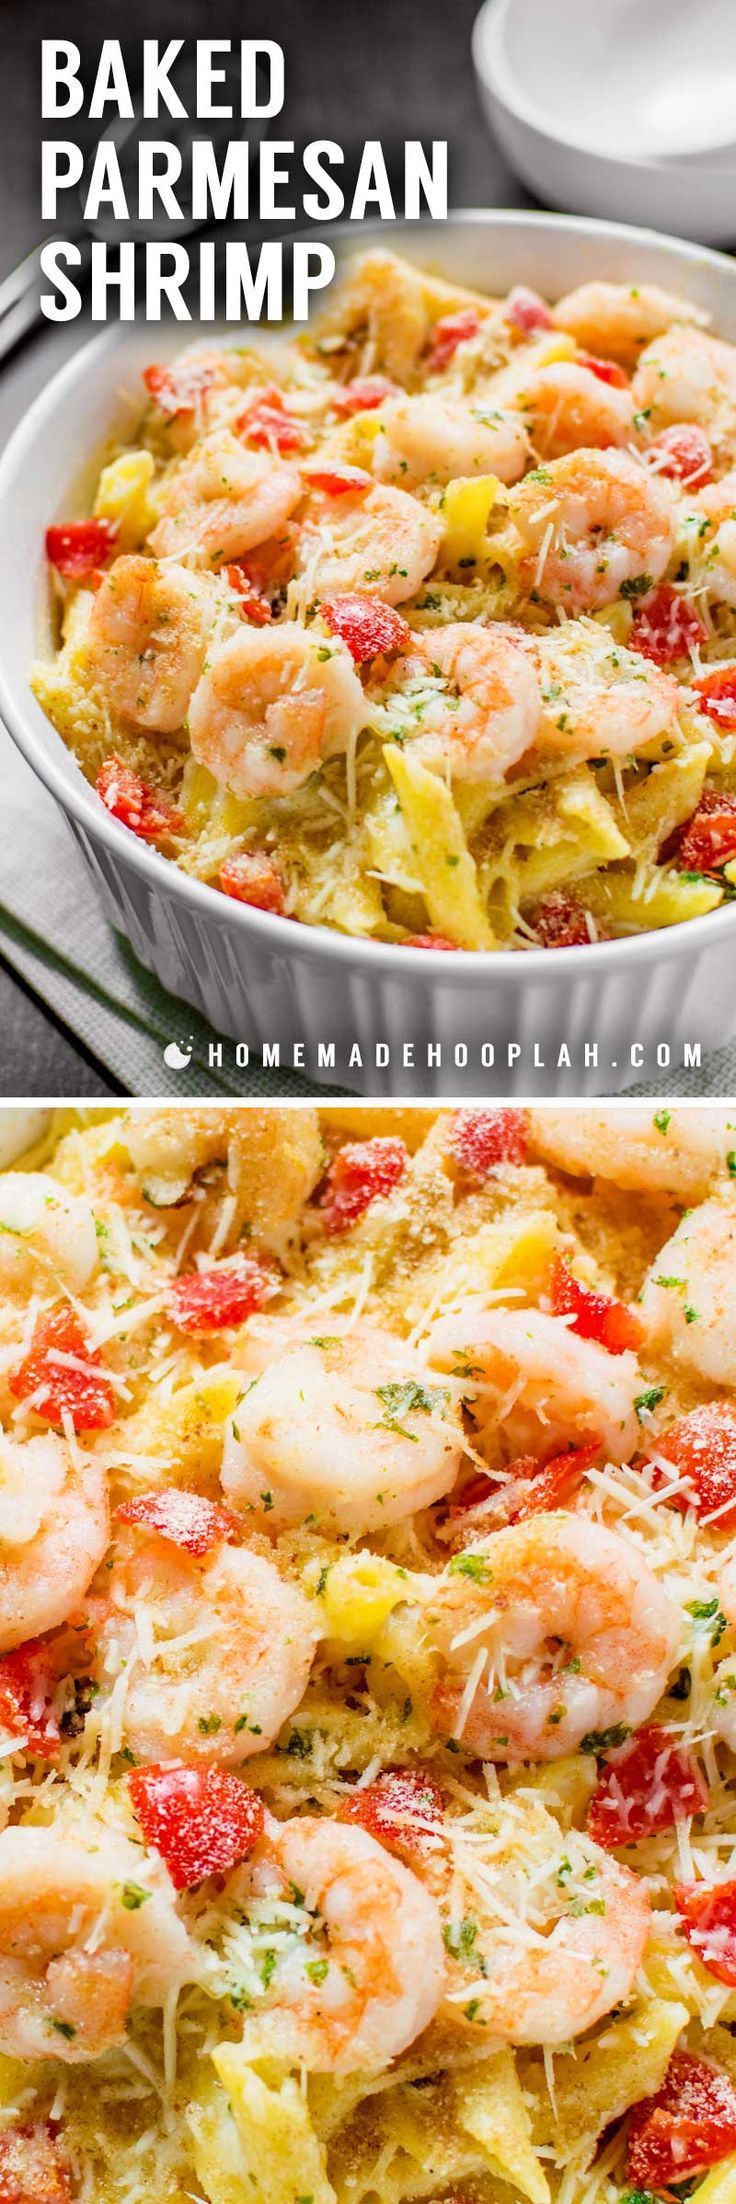 Baked Parmesan Shrimp! Bring the iconic taste of Olive Garden's baked parmesan shrimp to the comfort of your own home with this spot-on copycat recipe. | HomemadeHooplah.com -   25 seafood recipes copycat
 ideas